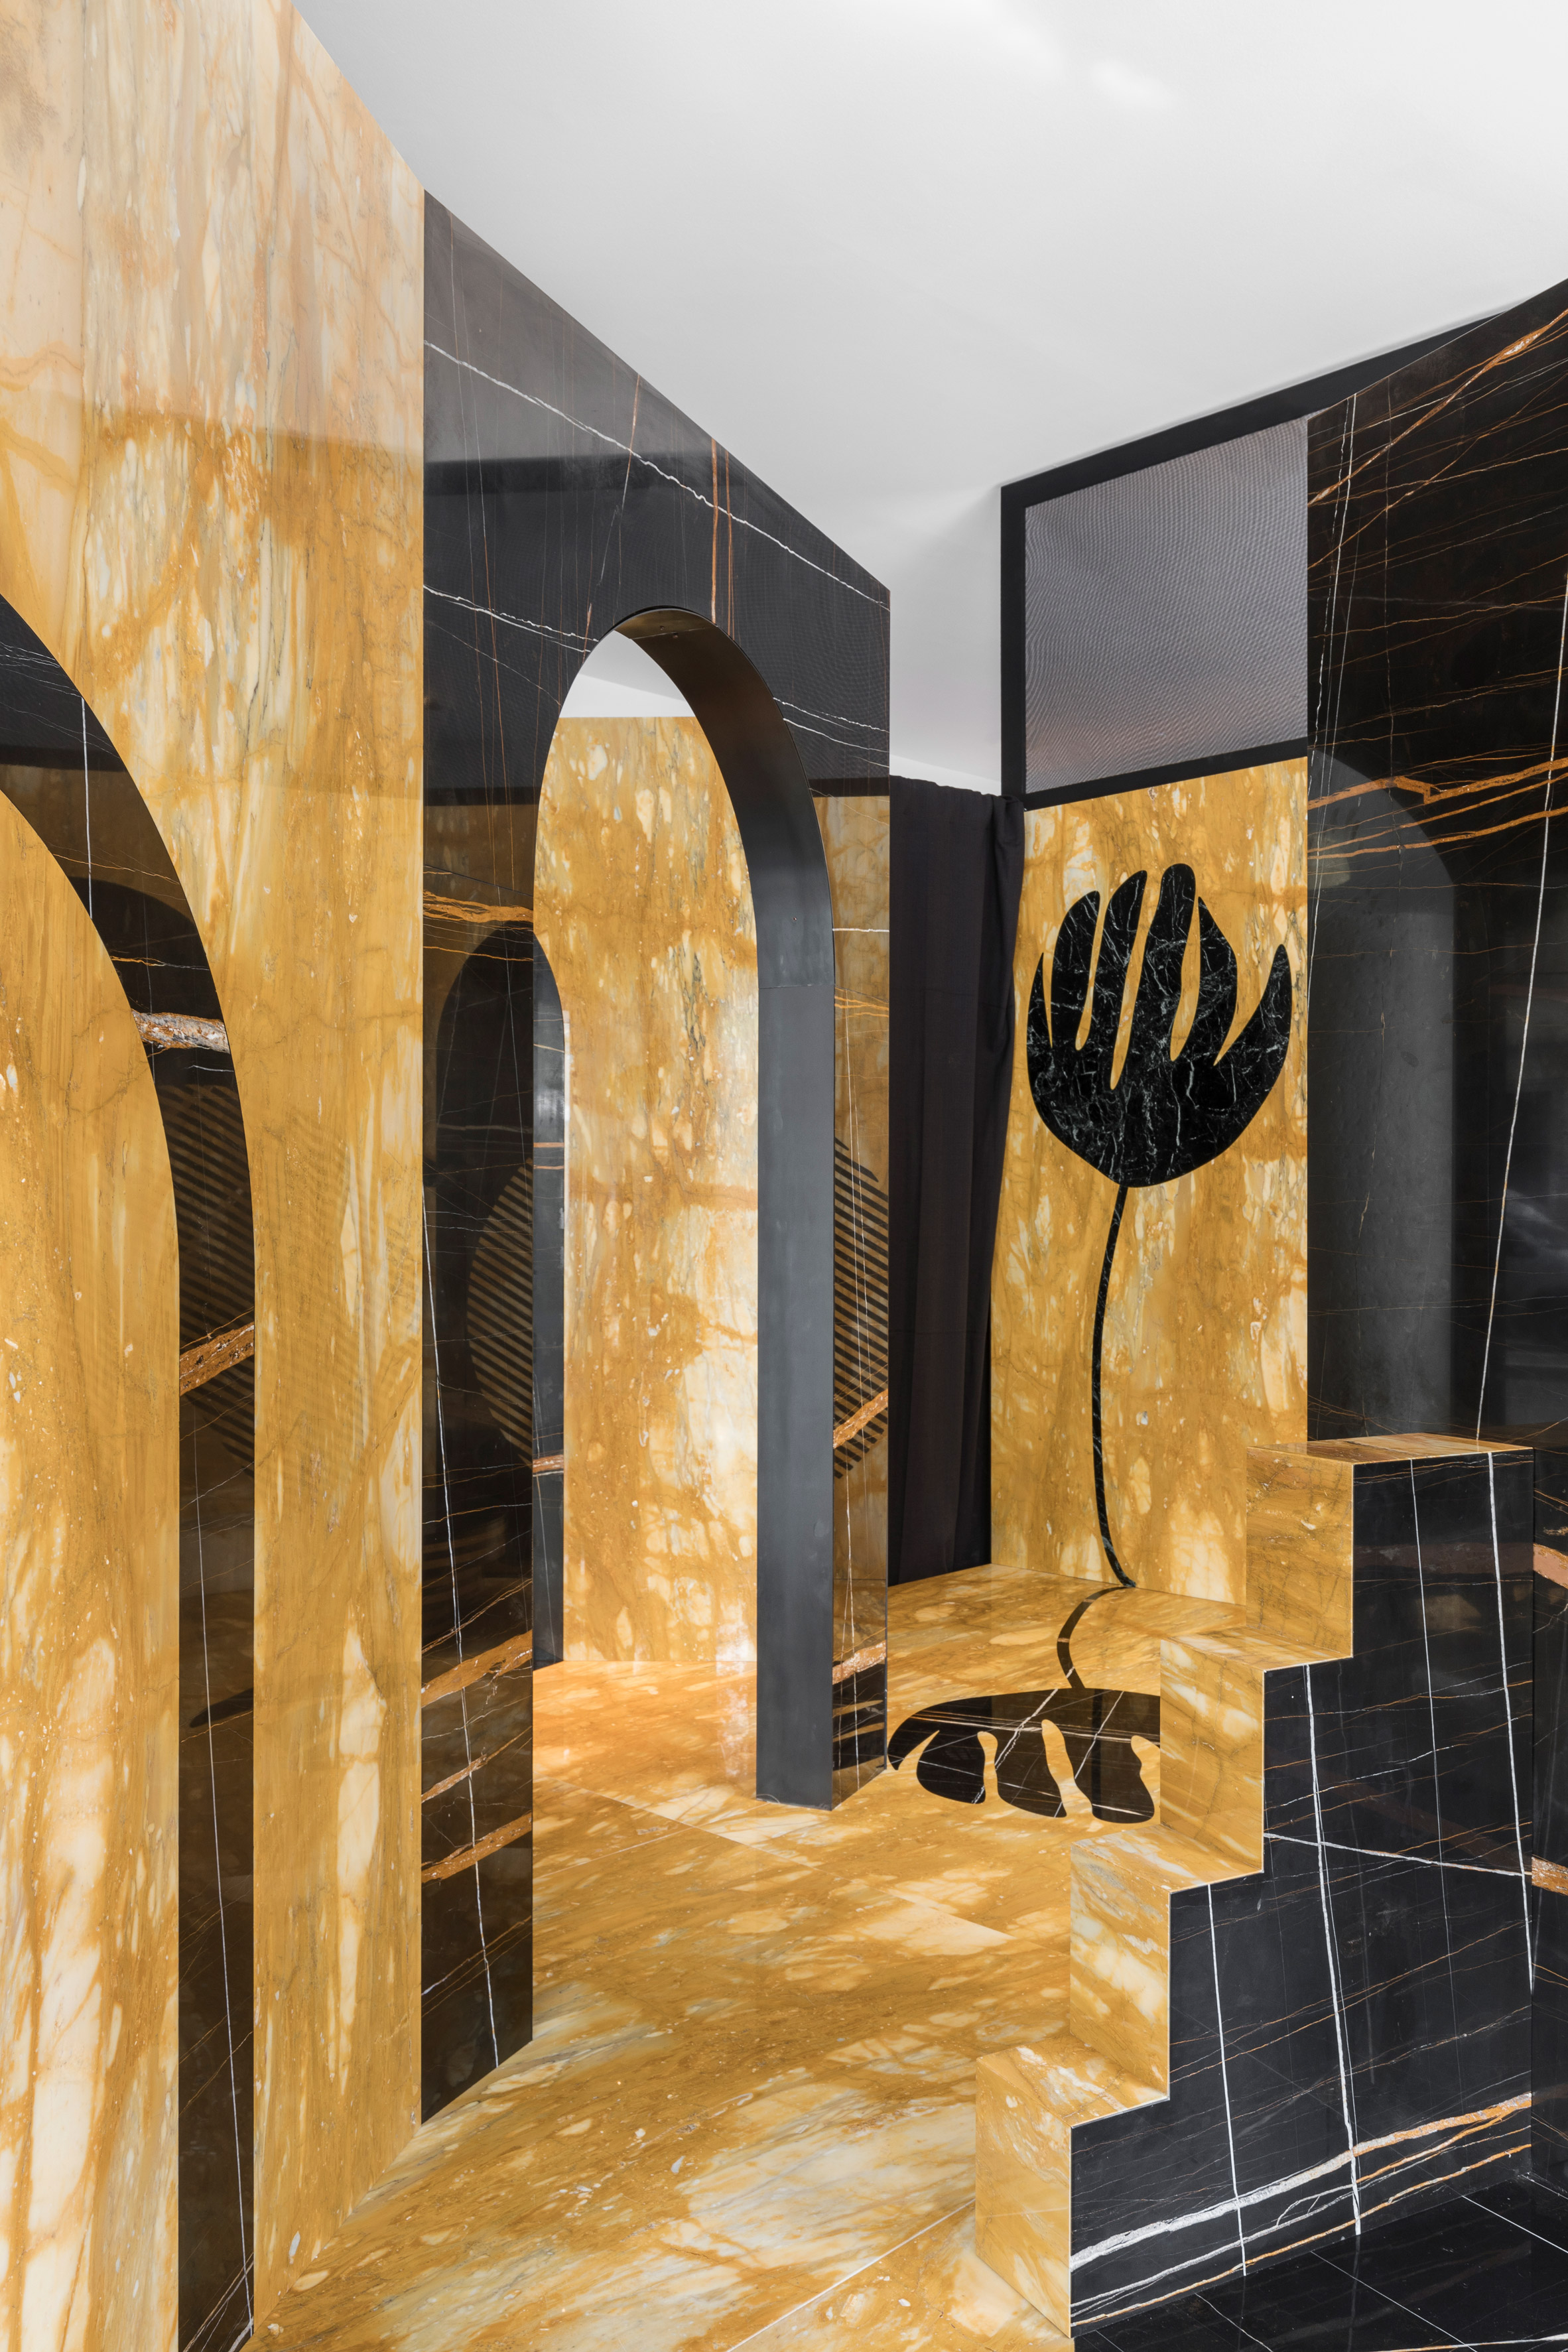 Mystical Solace installation by De Allegri and Fogale at Milan design week